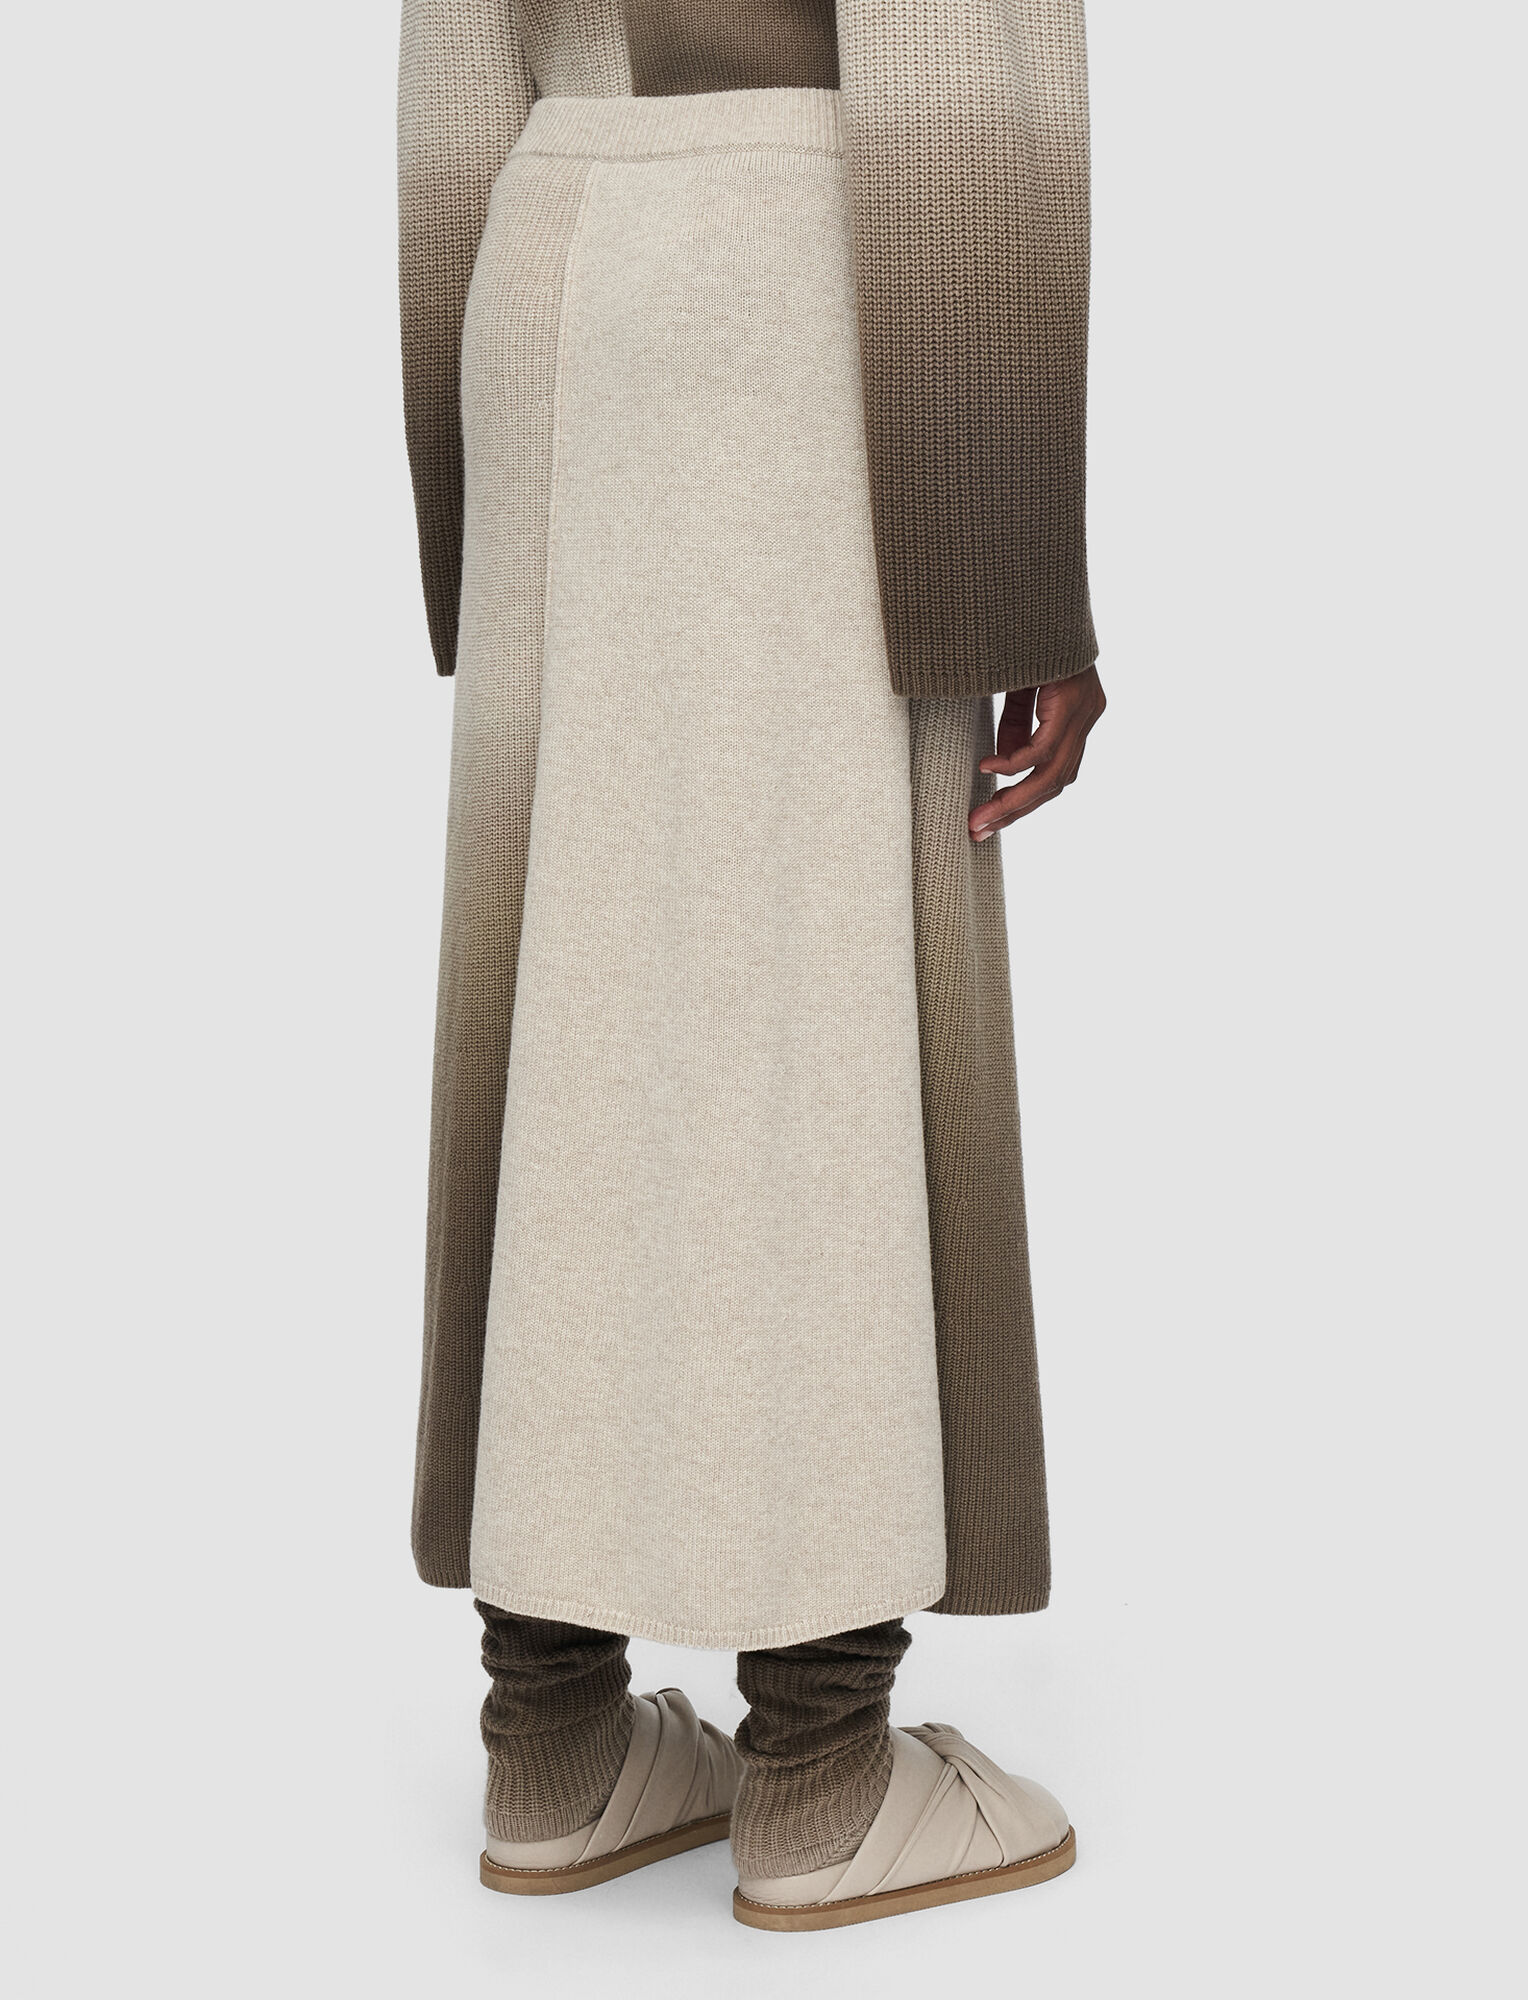 Joseph, Painted Wool Cashmere Skirt, in Cobble Stone